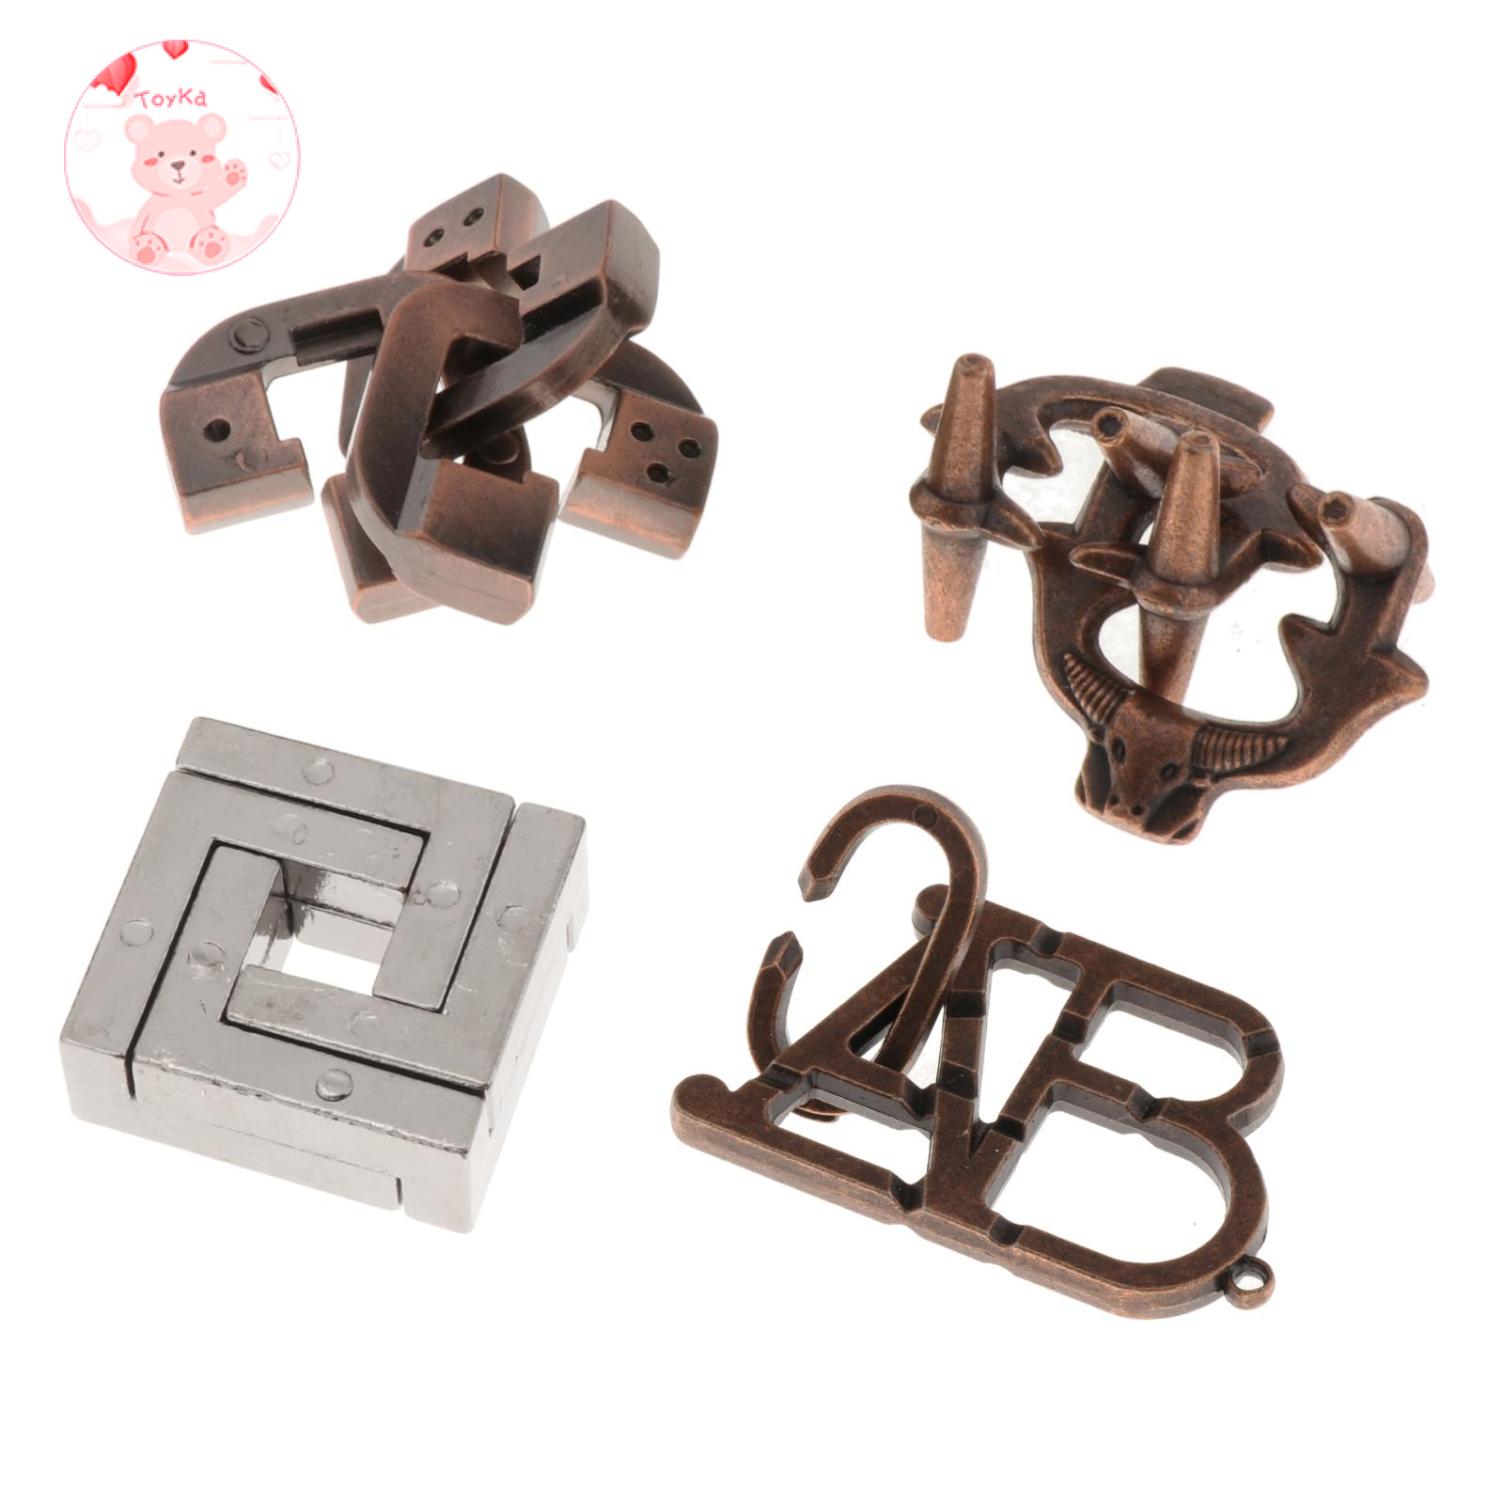 [whbadguy]3D Alloy  Lock Toy Box IQ Test Educational Toys Model Games Funny Gifts